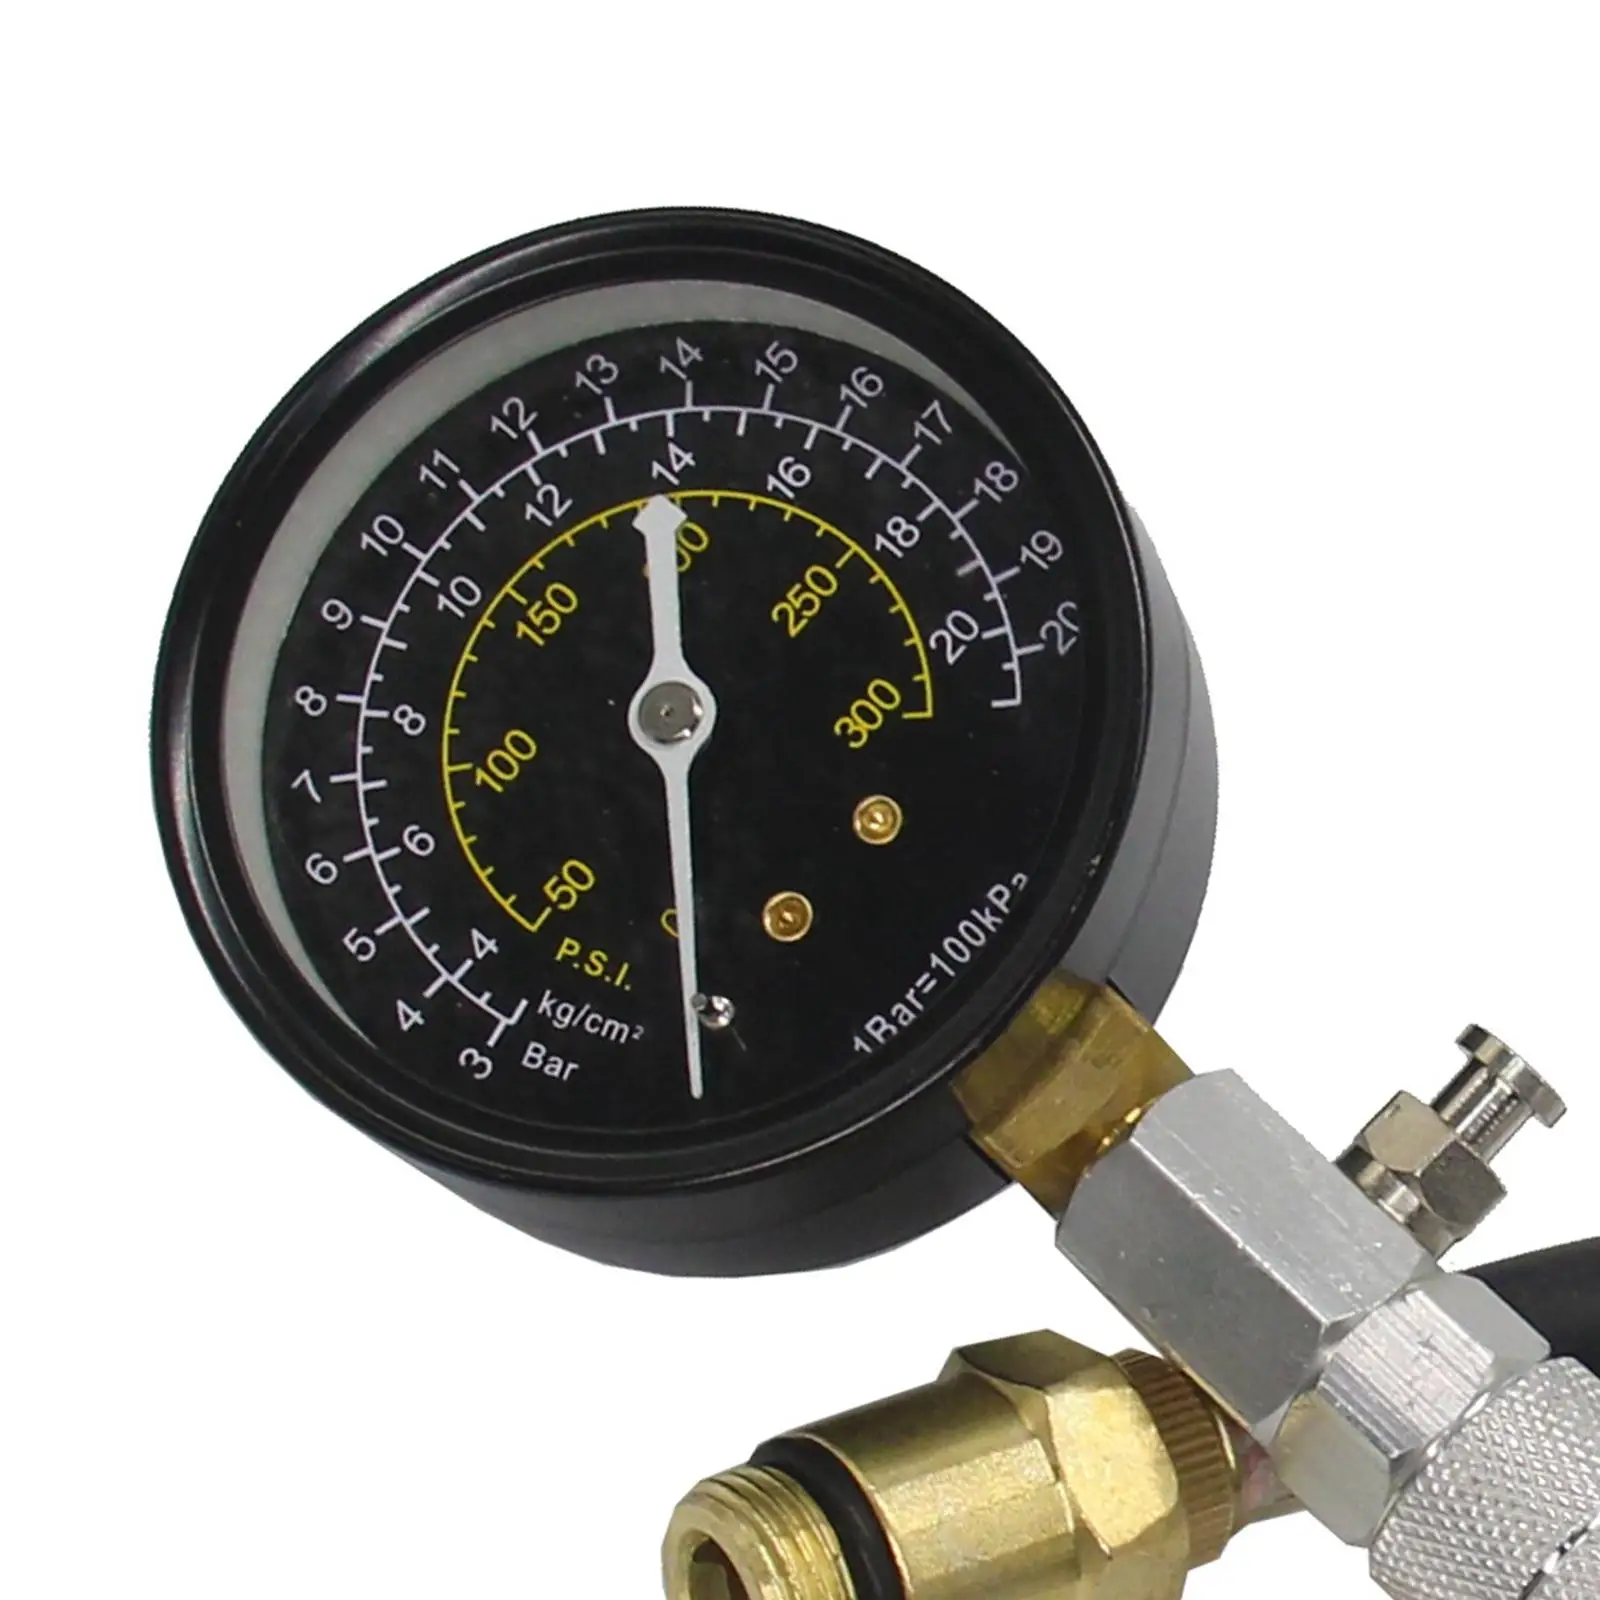 Compression Kit 300 PSI Check Test Meter for Motorcycle Atvs